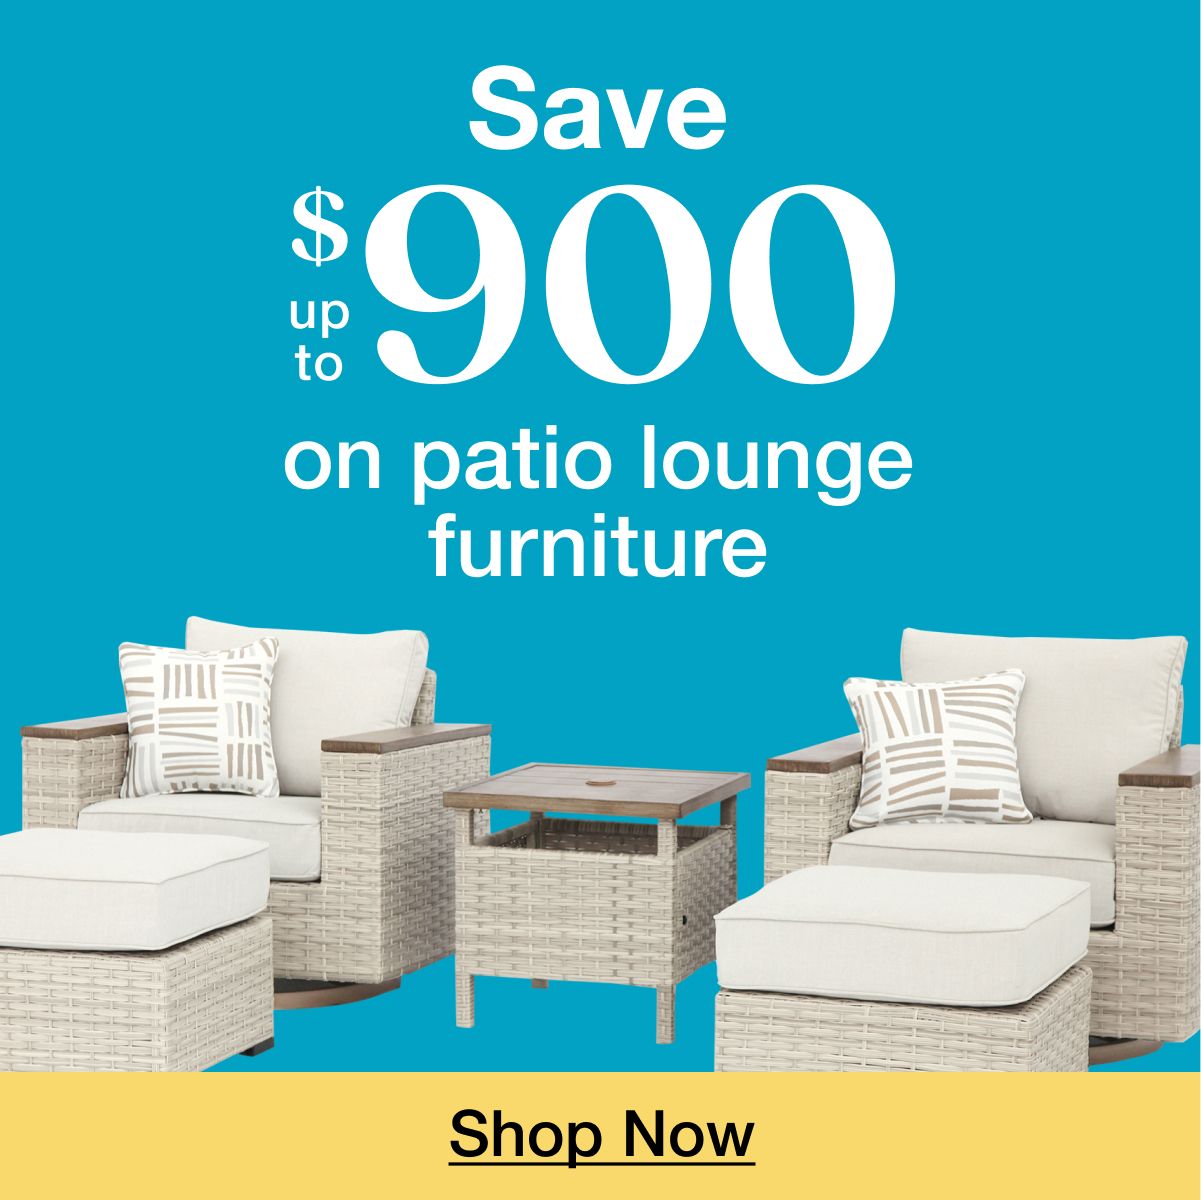 Save up to $900 on Patio Lounge Furniture. Click to shop now